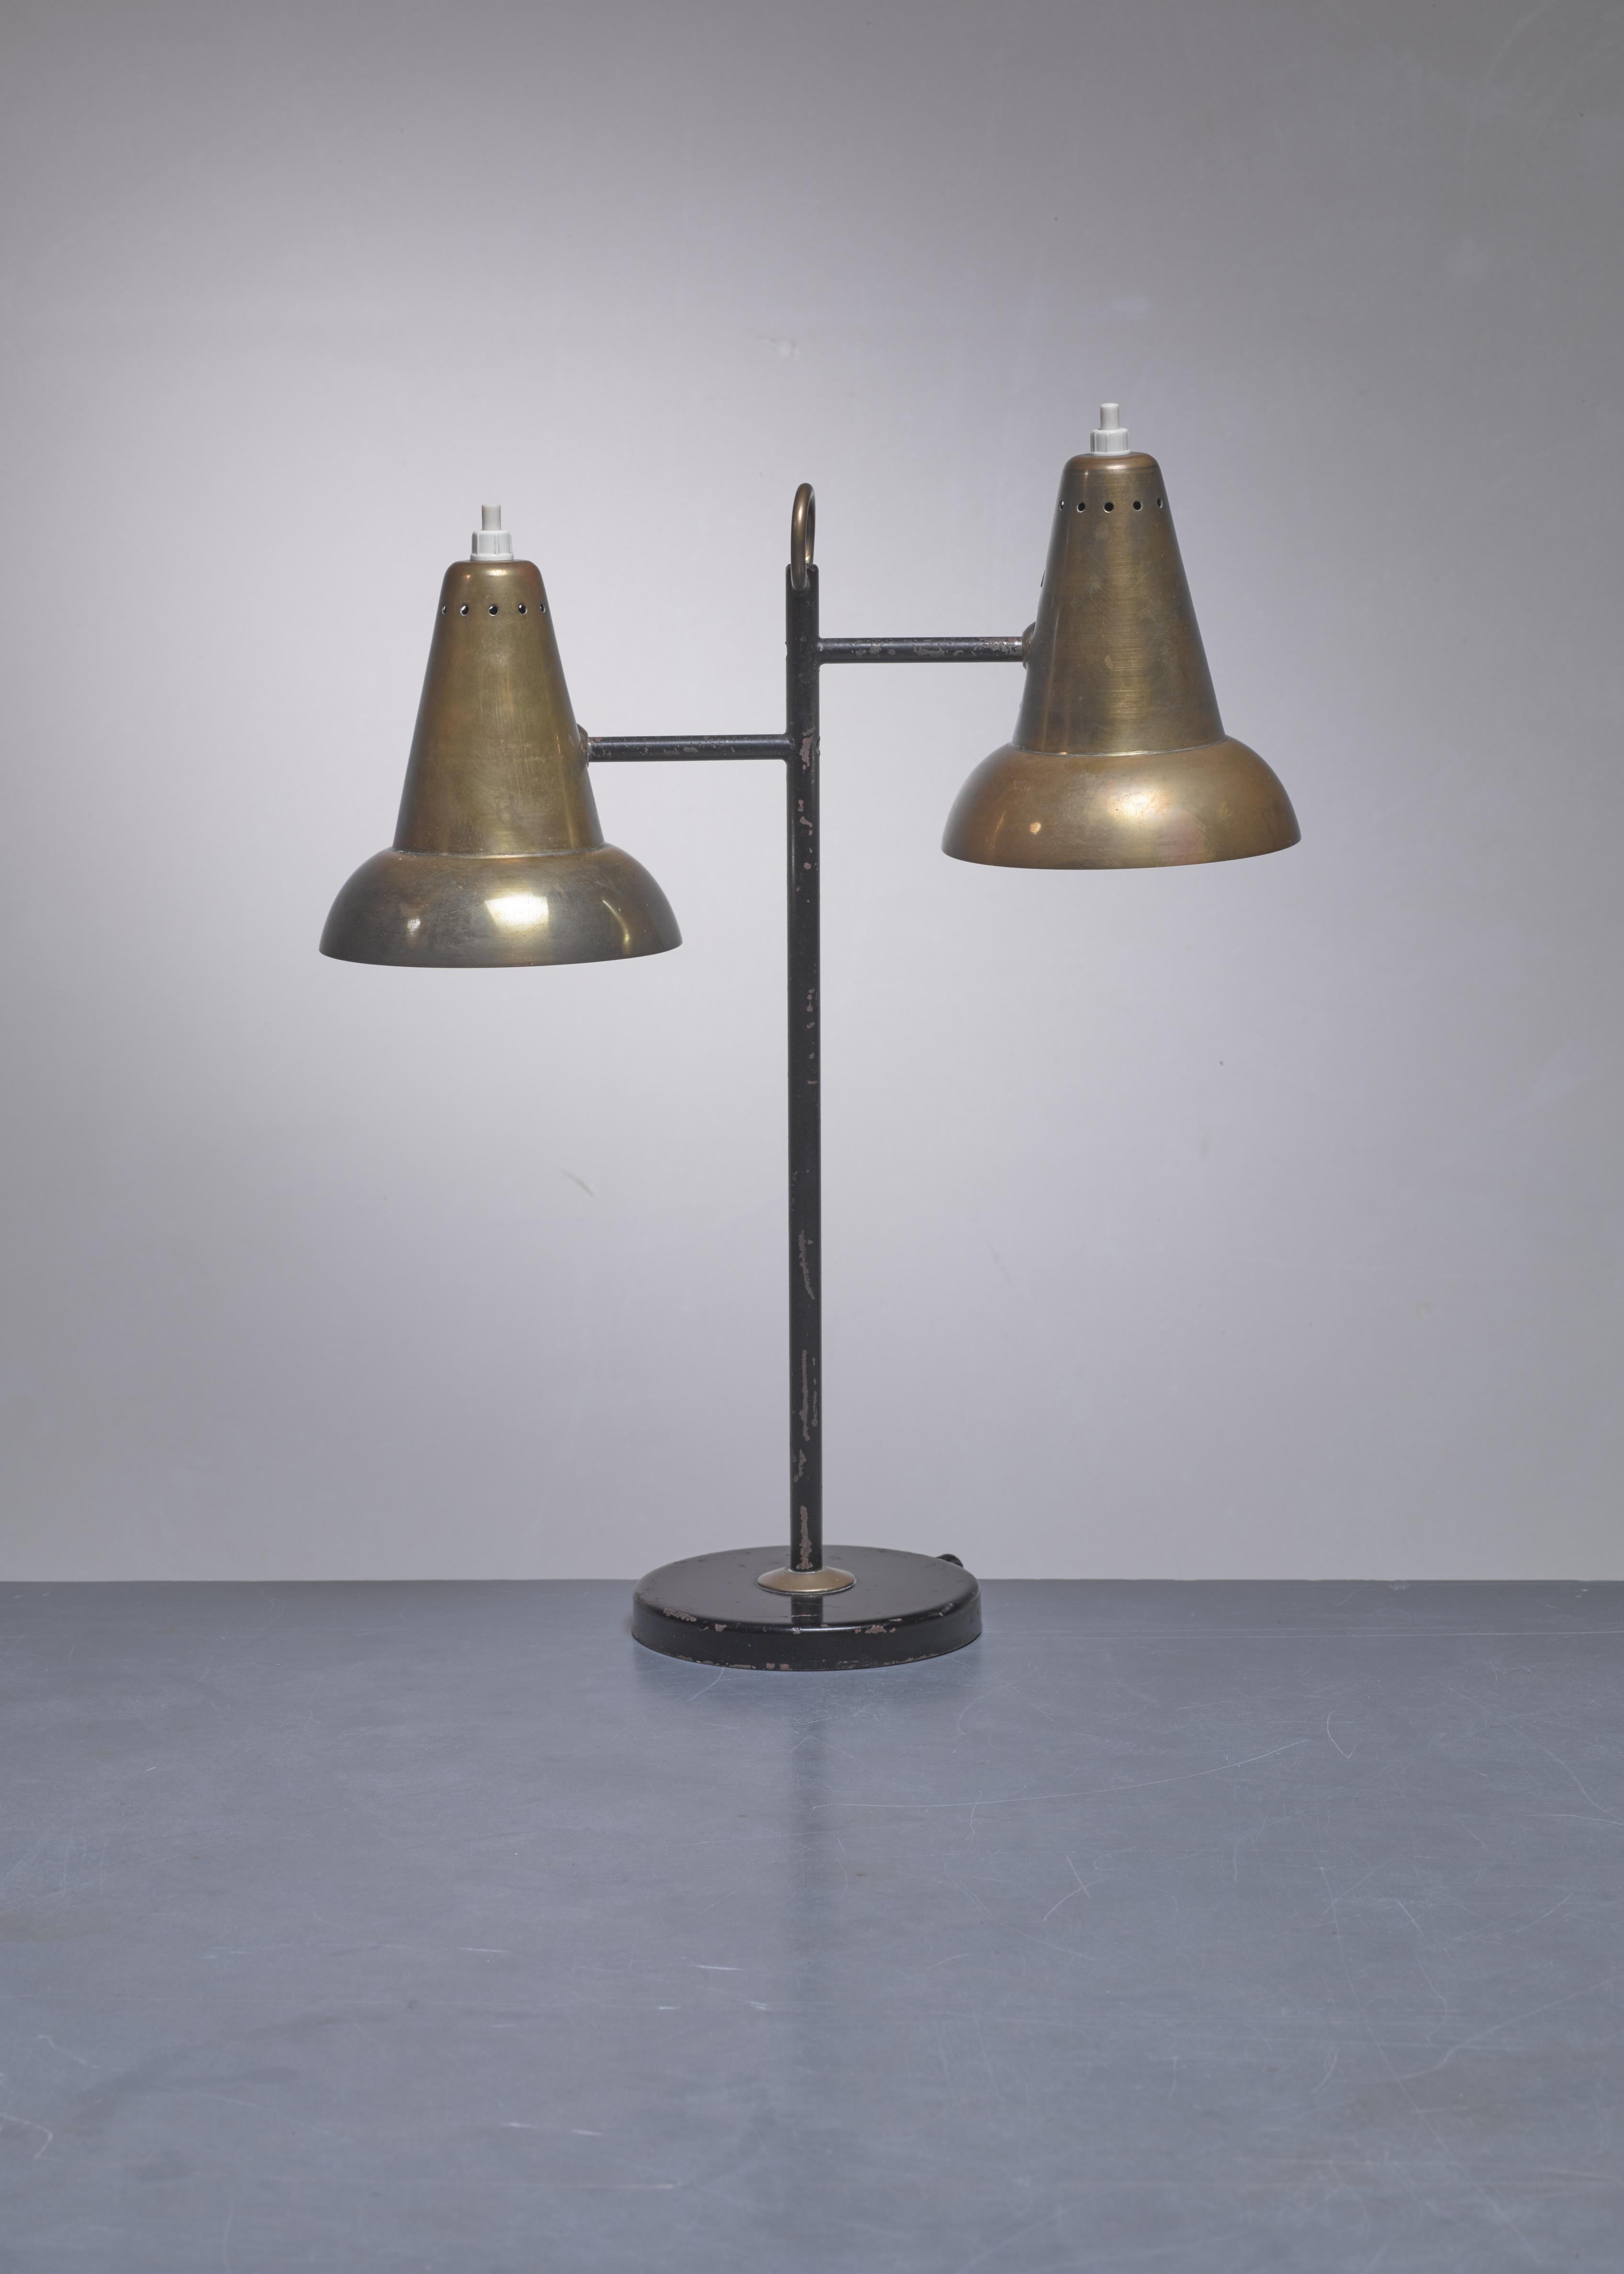 A French Modernist table lamp made of black lacquered metal and brass. The lamp has two adjustable hoods, connected with a ball joint. The design is reminiscent of the work of Jacques Biny.